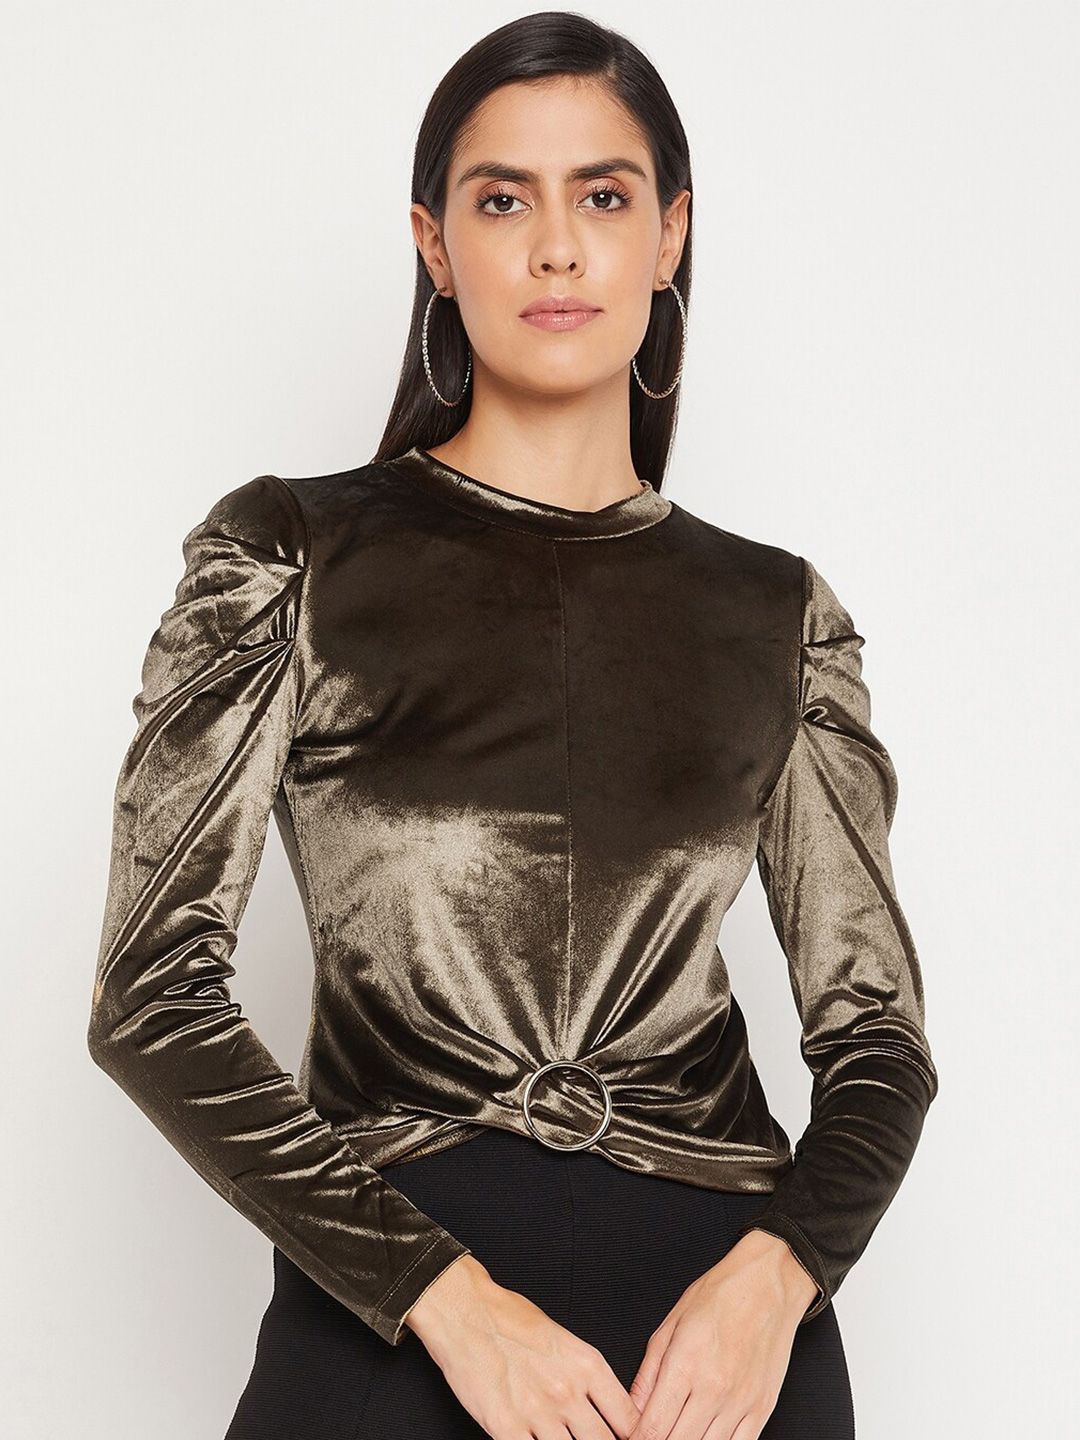 CAMLA Women Olive Green Bling & Sparkly Top Price in India